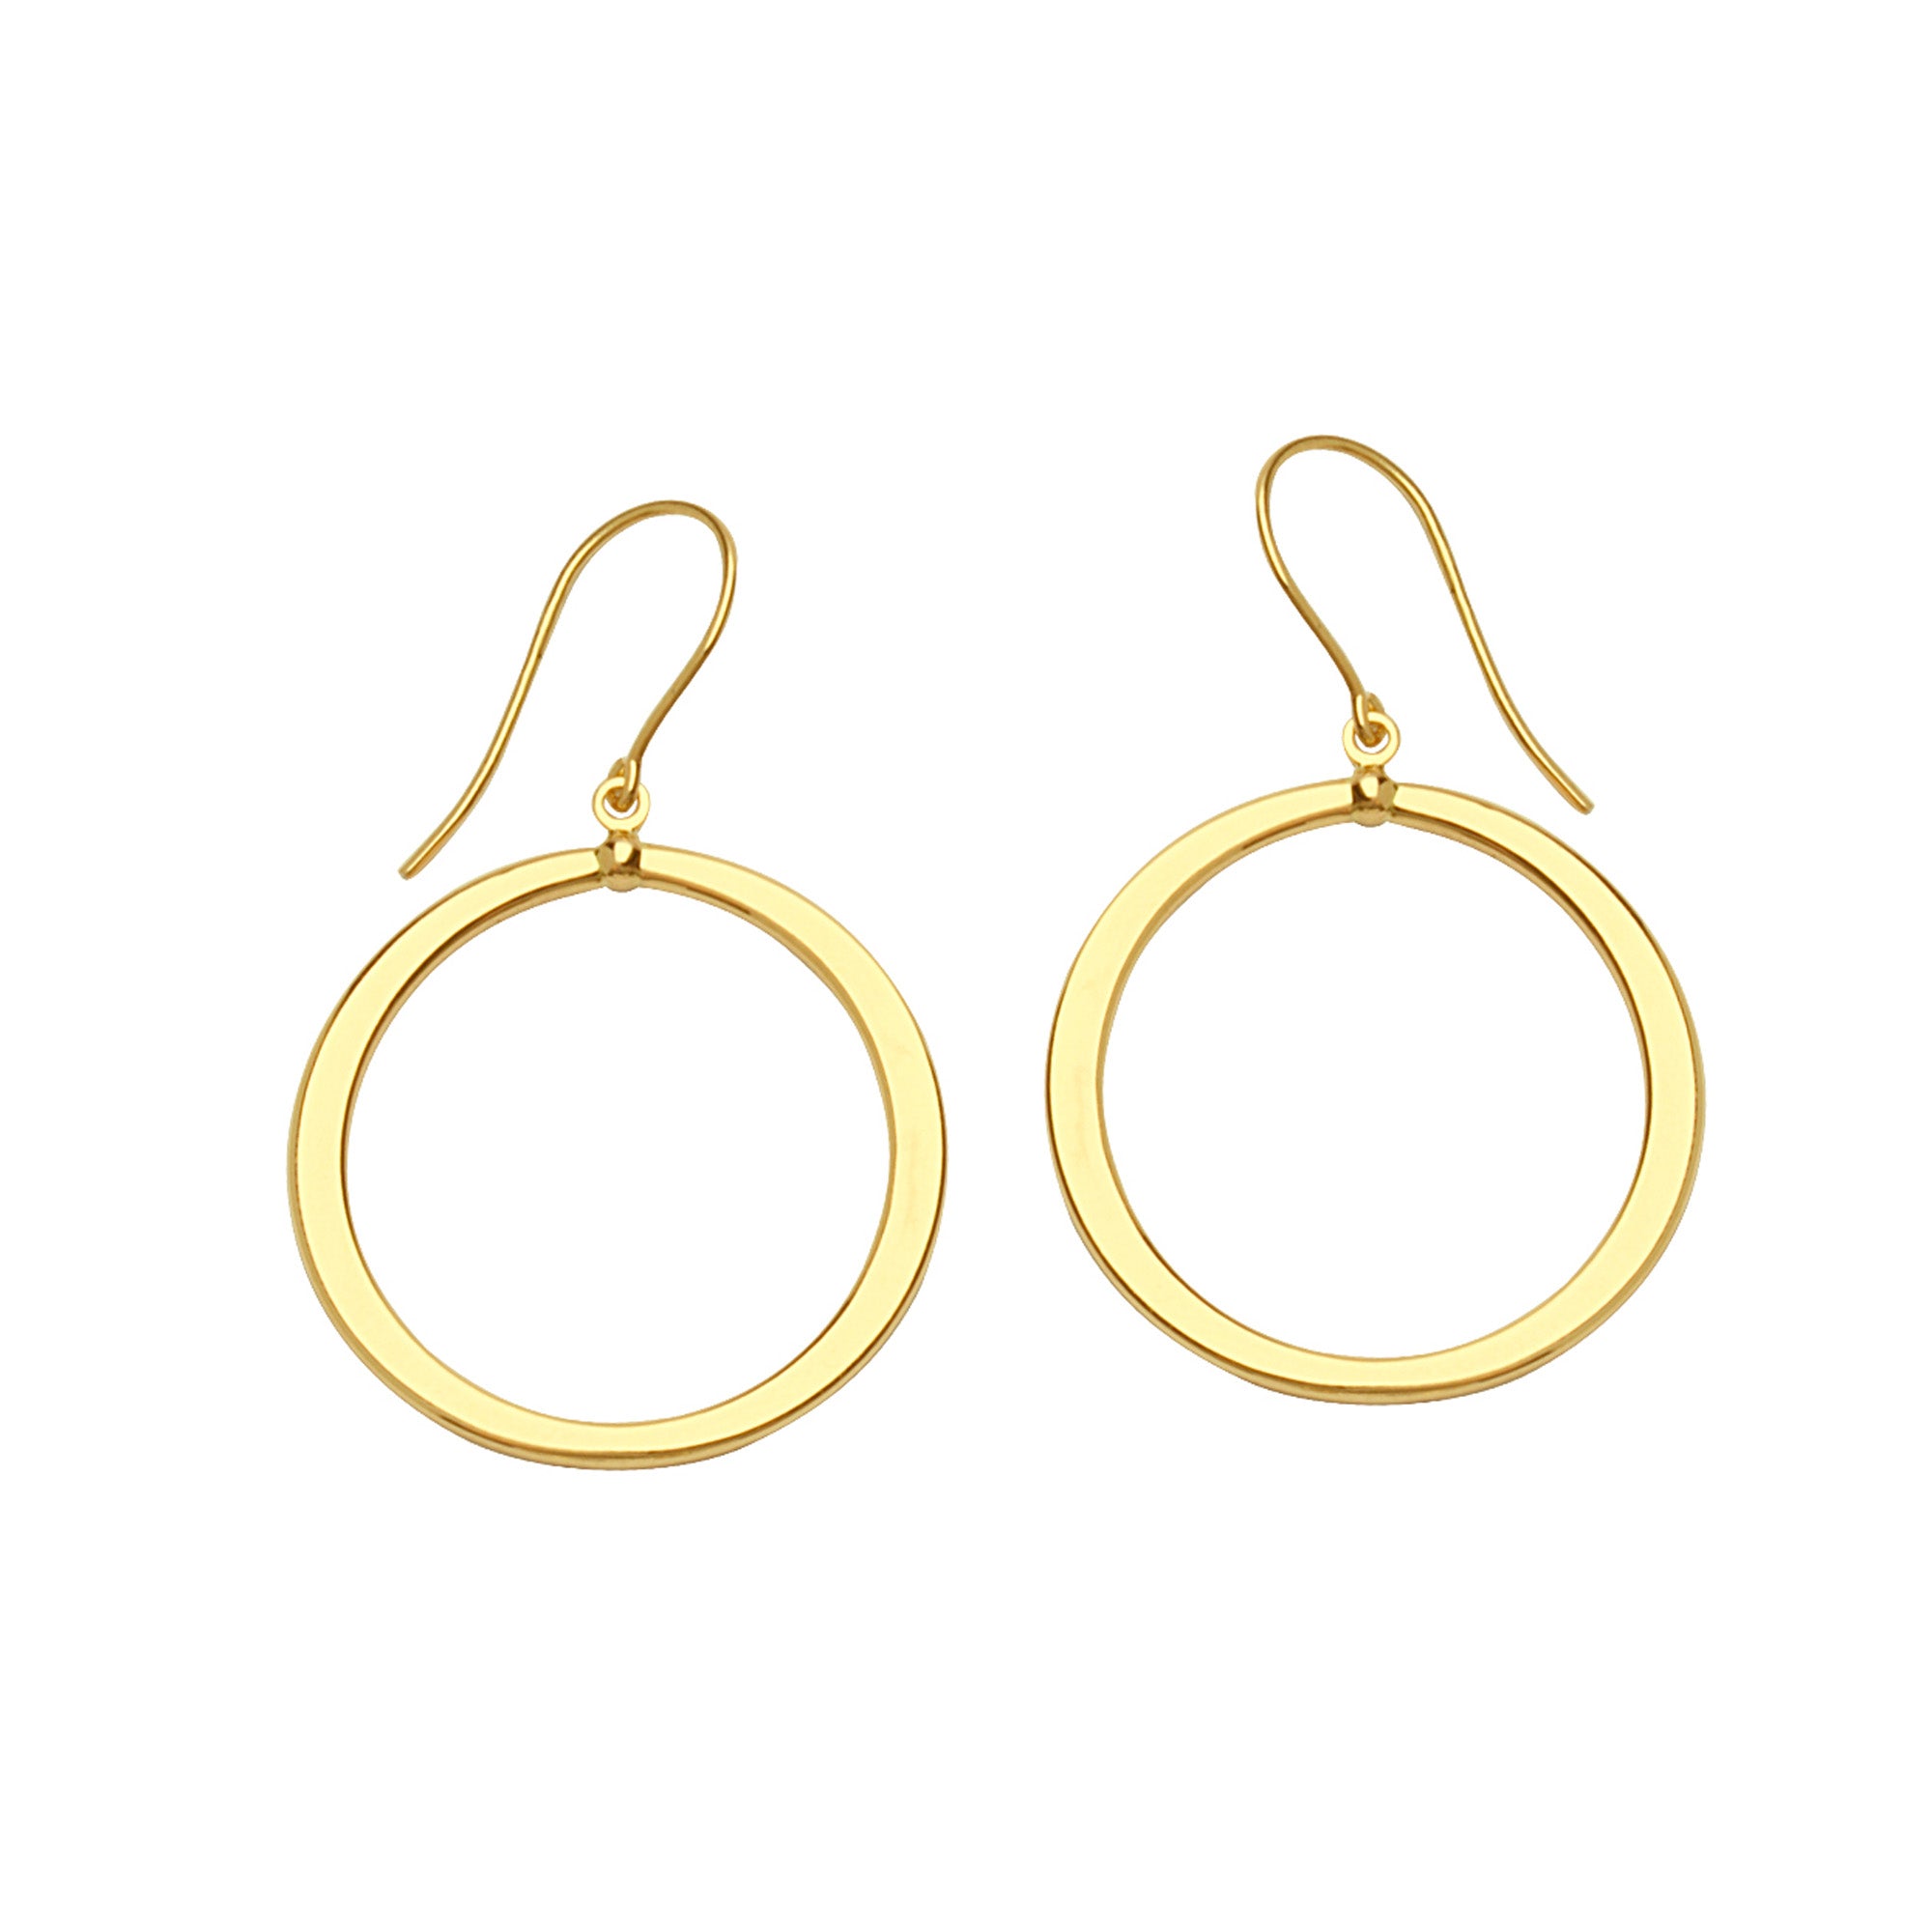 14K Yellow Gold Shiny Round Drop Earrings fine designer jewelry for men and women